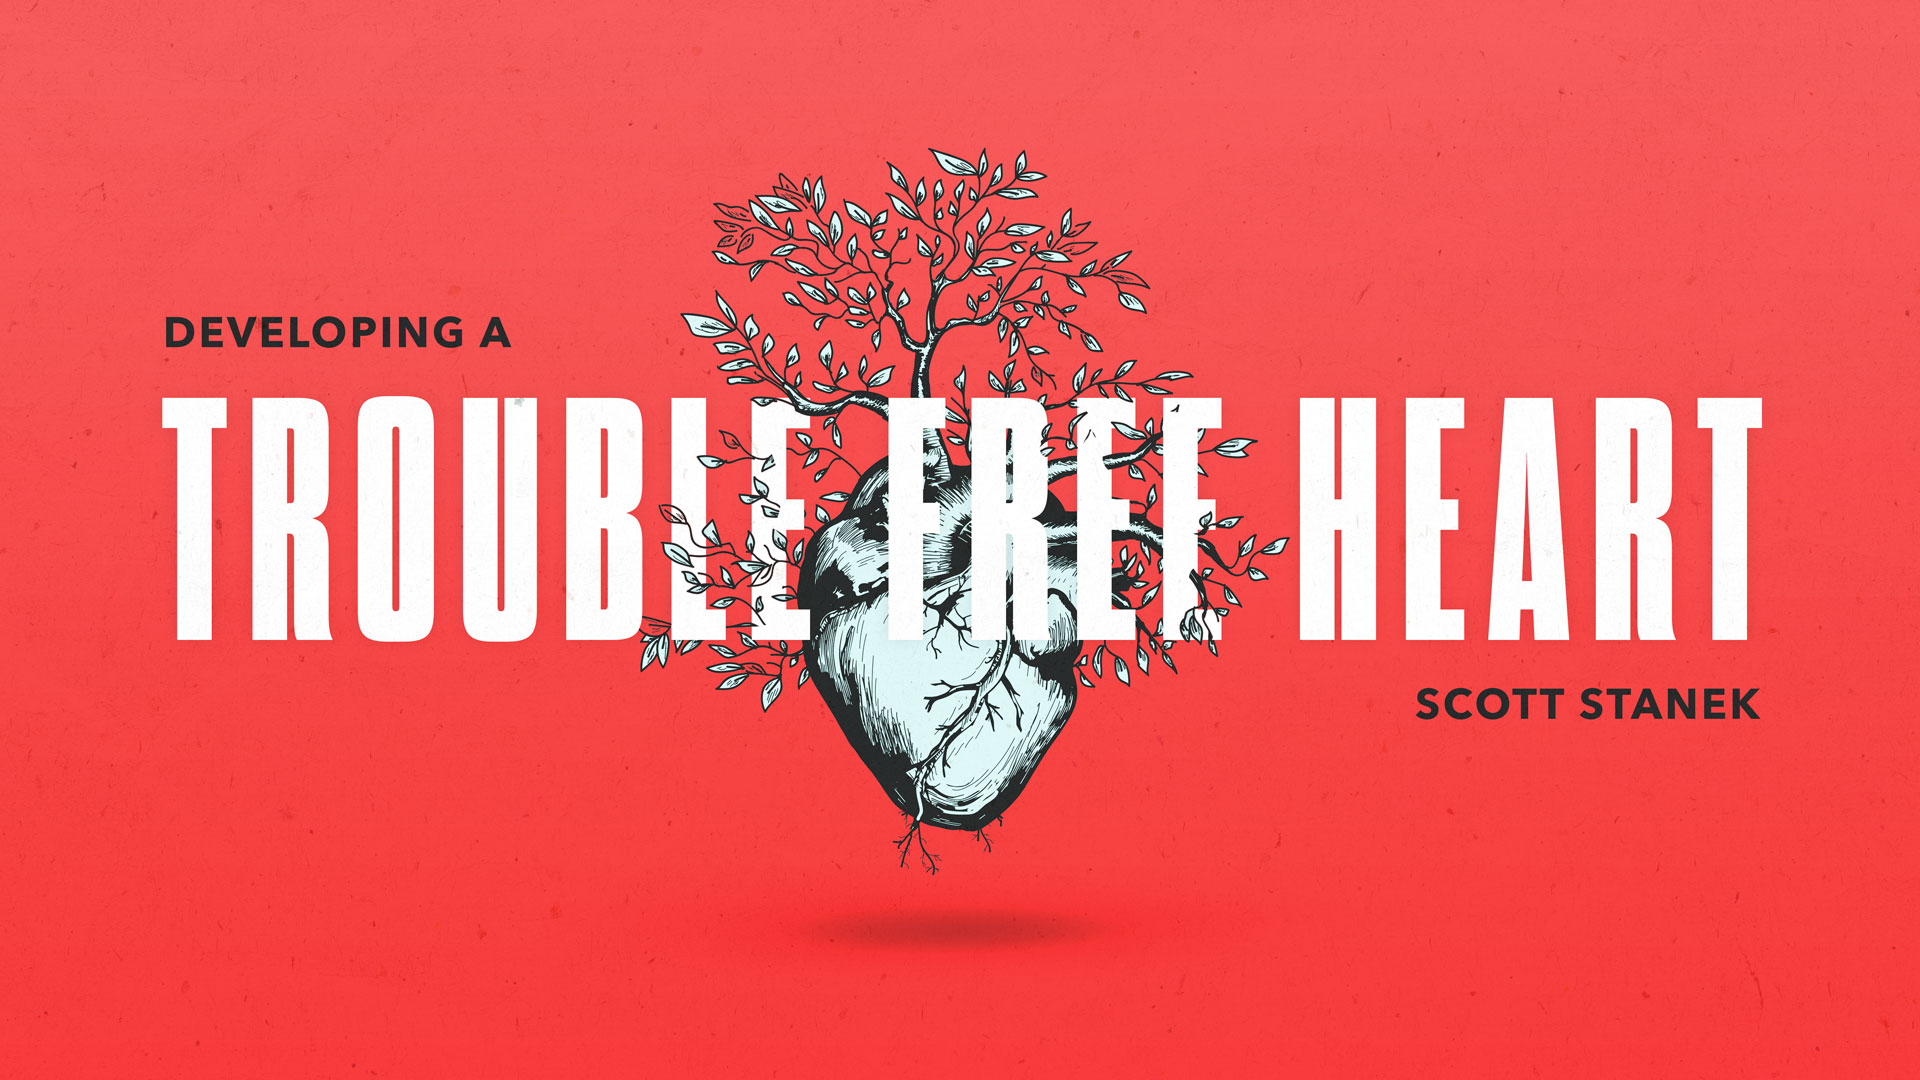 Developing a Trouble Free Heart